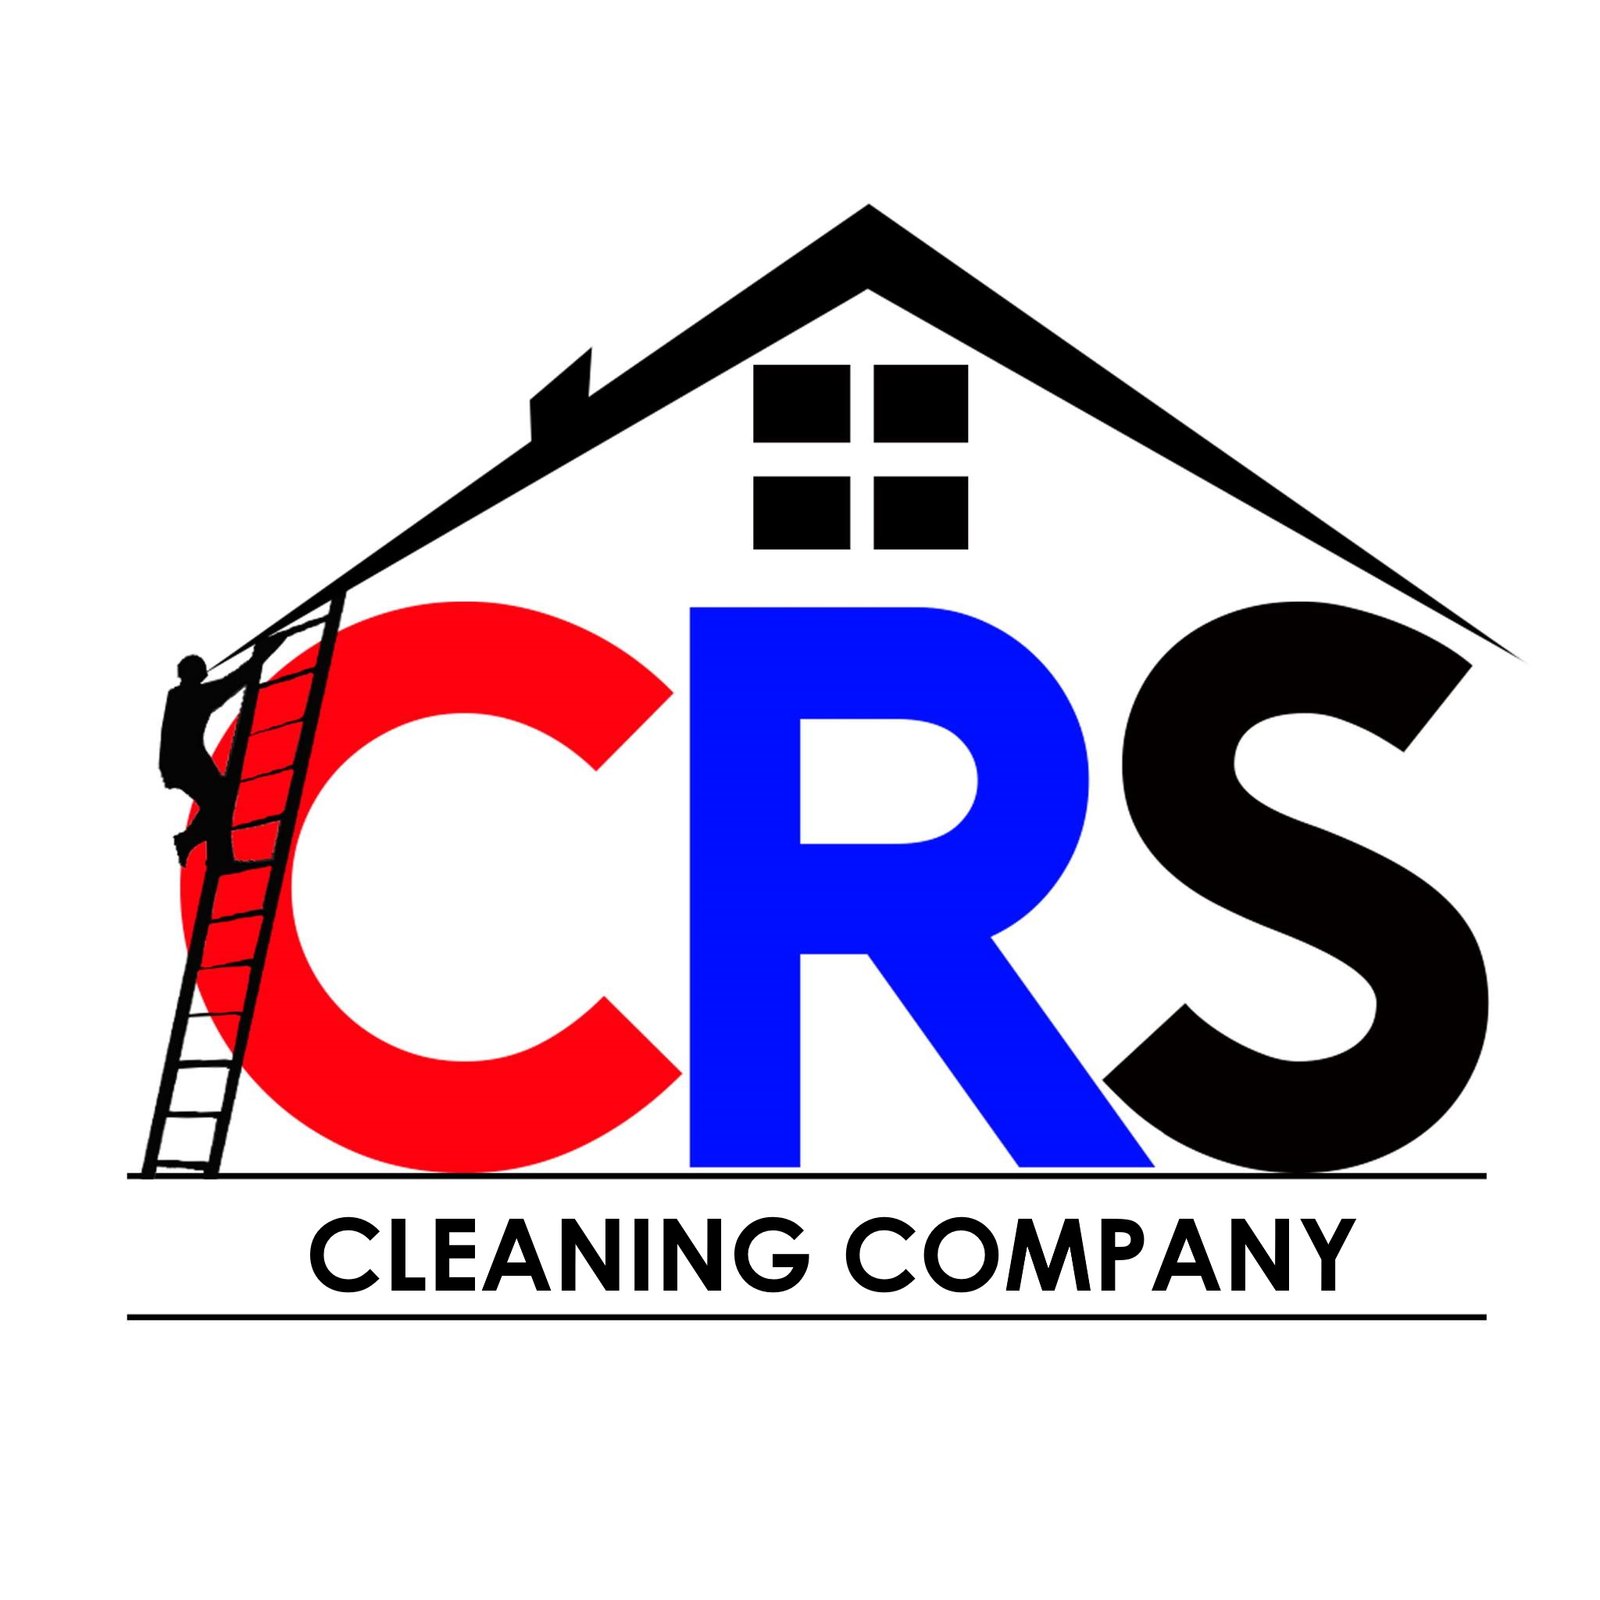 CRS Cleaning Company Logo